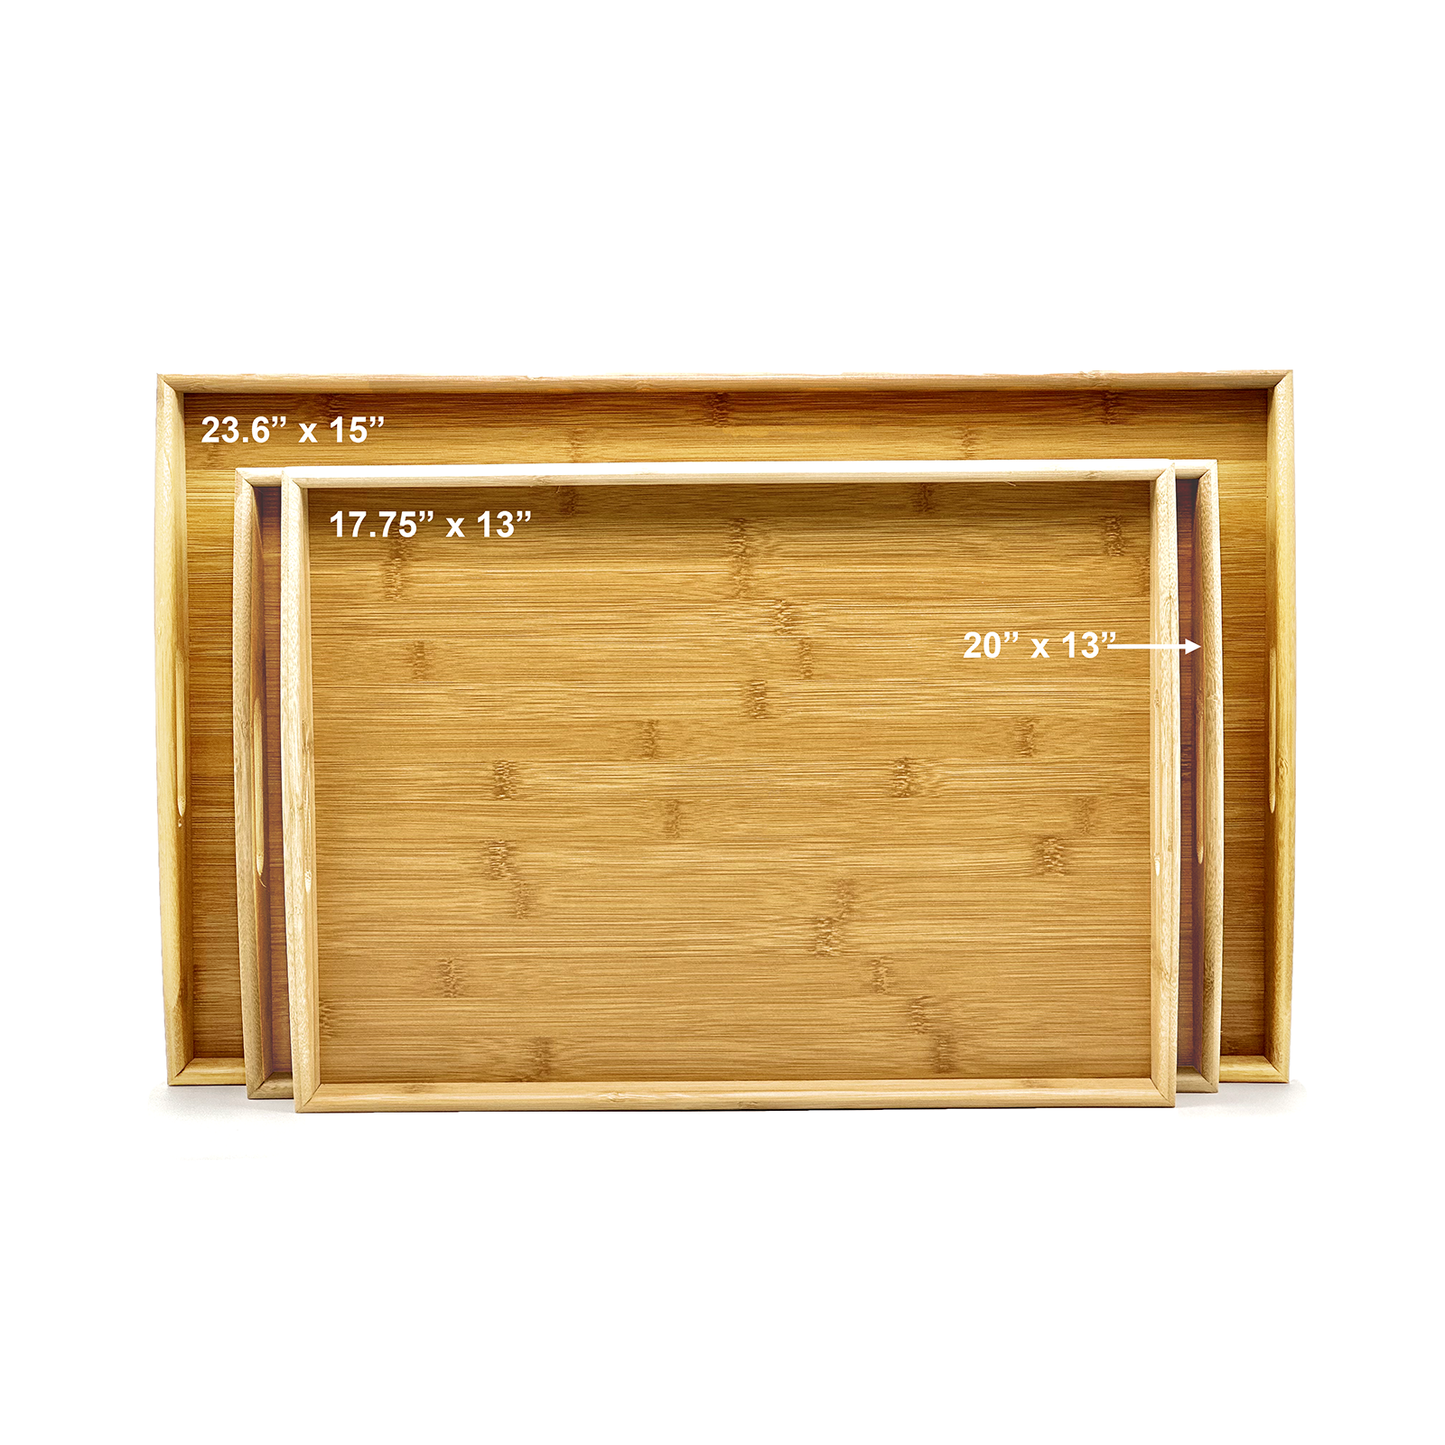 17.75" x 13" Bam & Boo Natural Bamboo Large Serving Tray with Handles